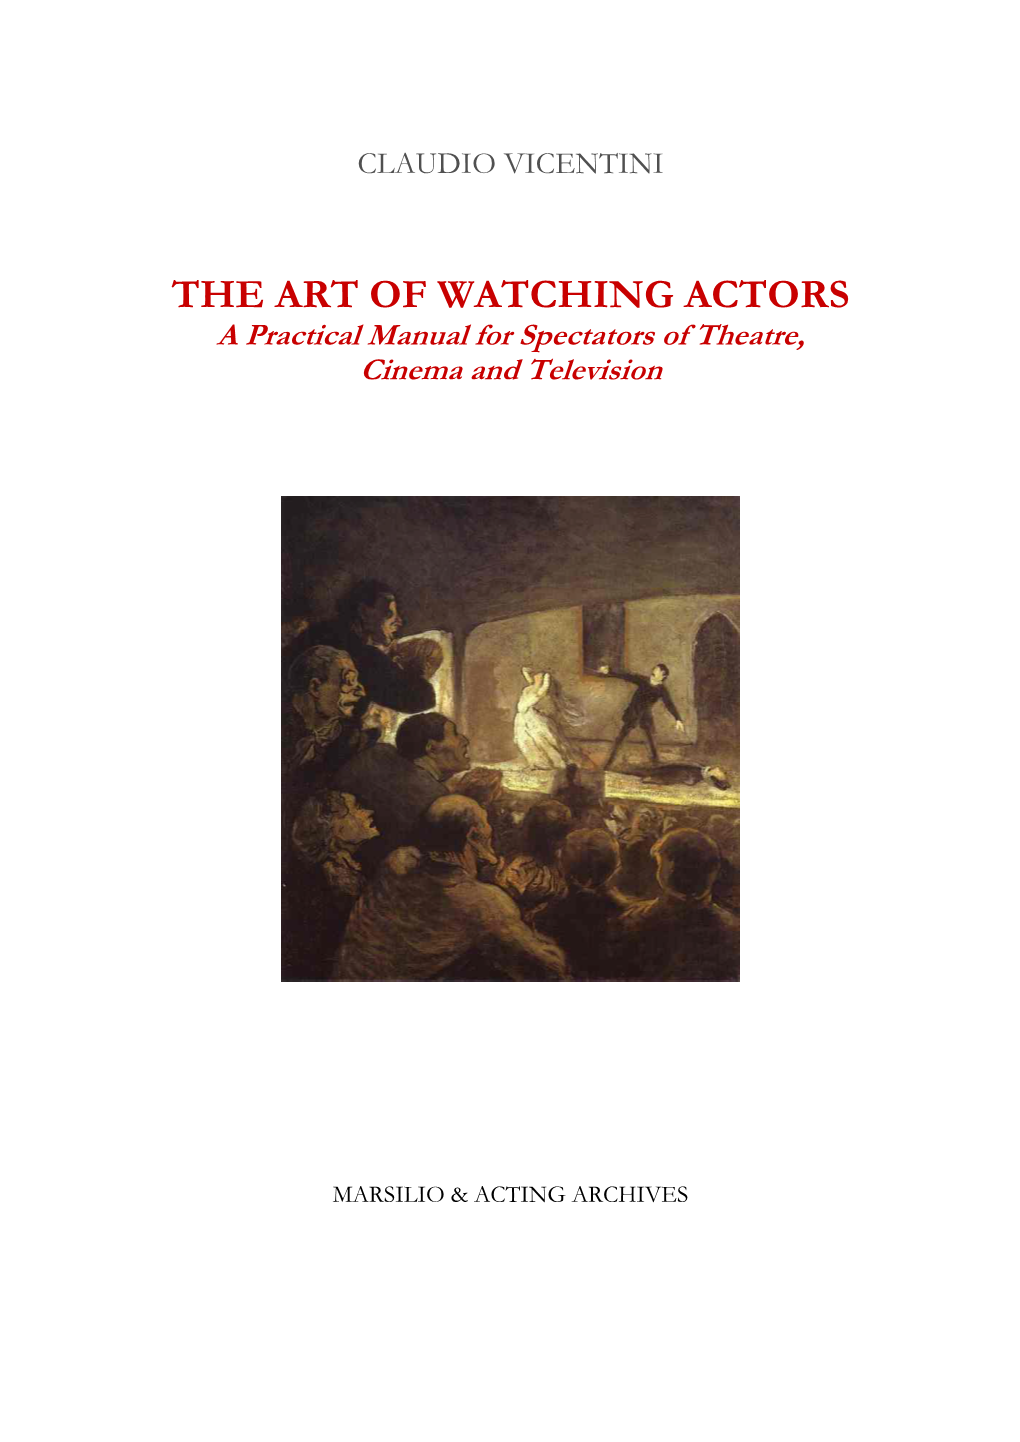 THE ART of WATCHING ACTORS a Practical Manual for Spectators of Theatre, Cinema and Television